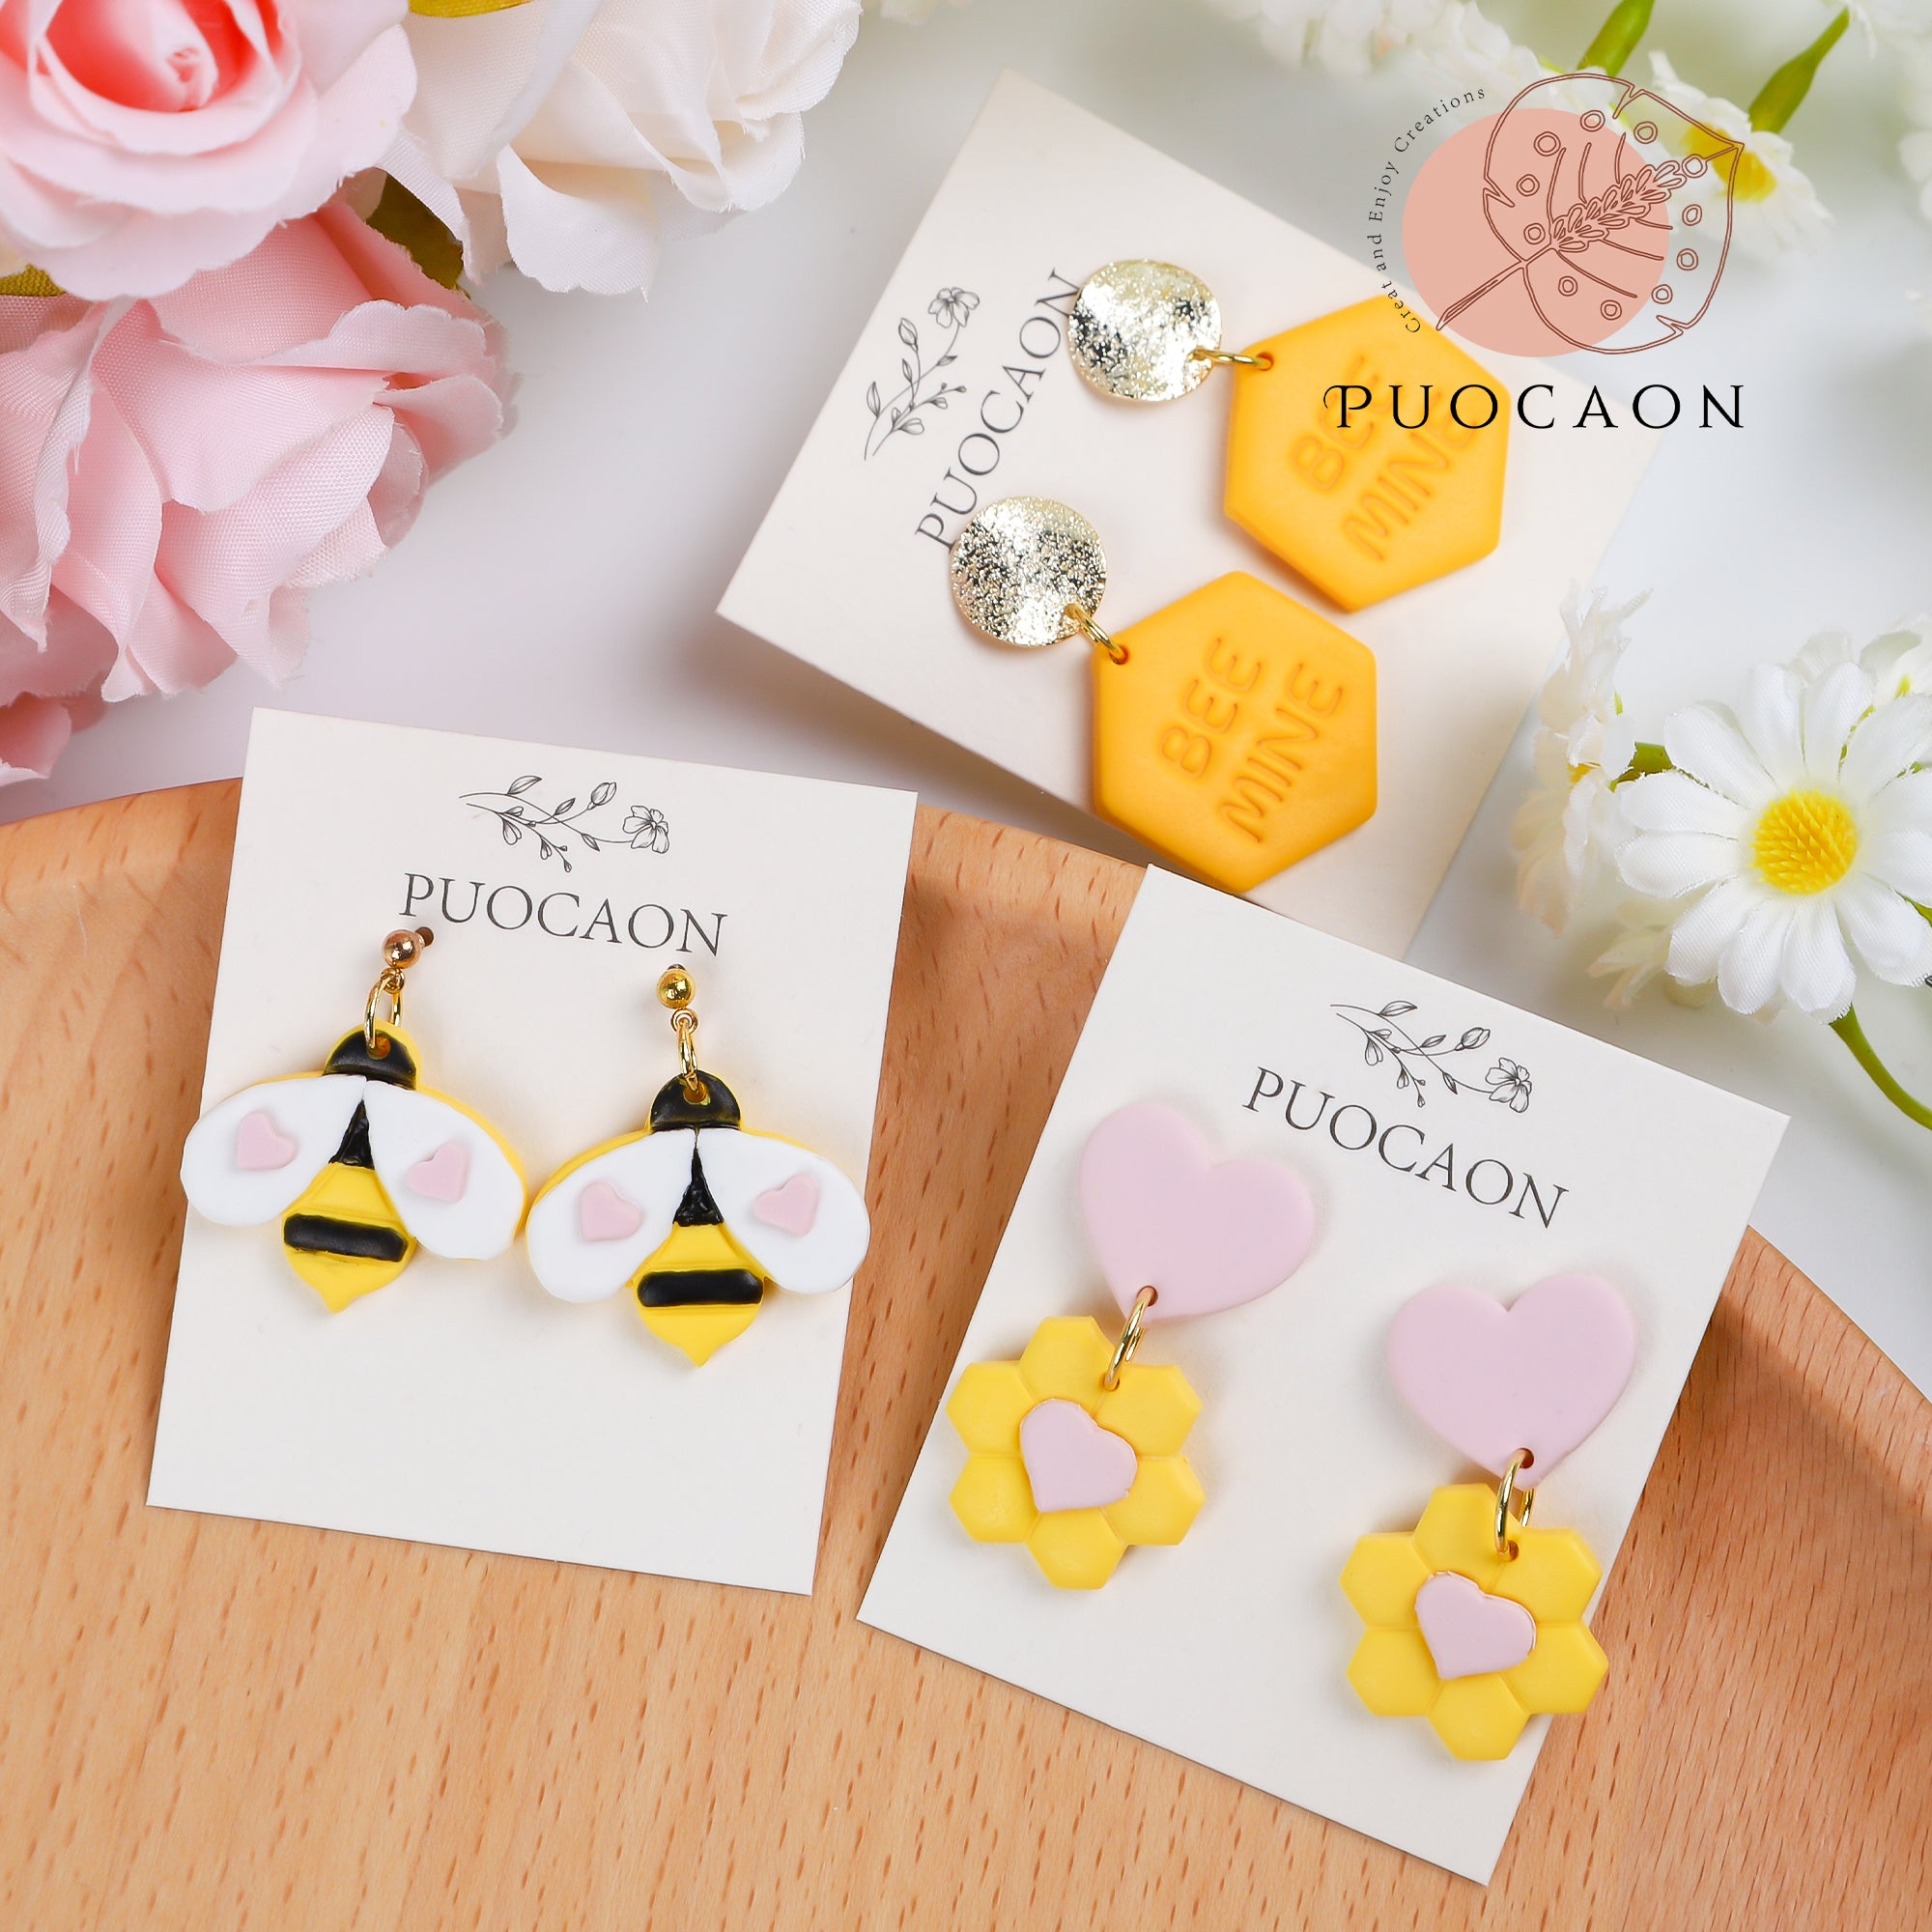 Puocaon Honeybee Polymer Clay Cutters 5 Pcs